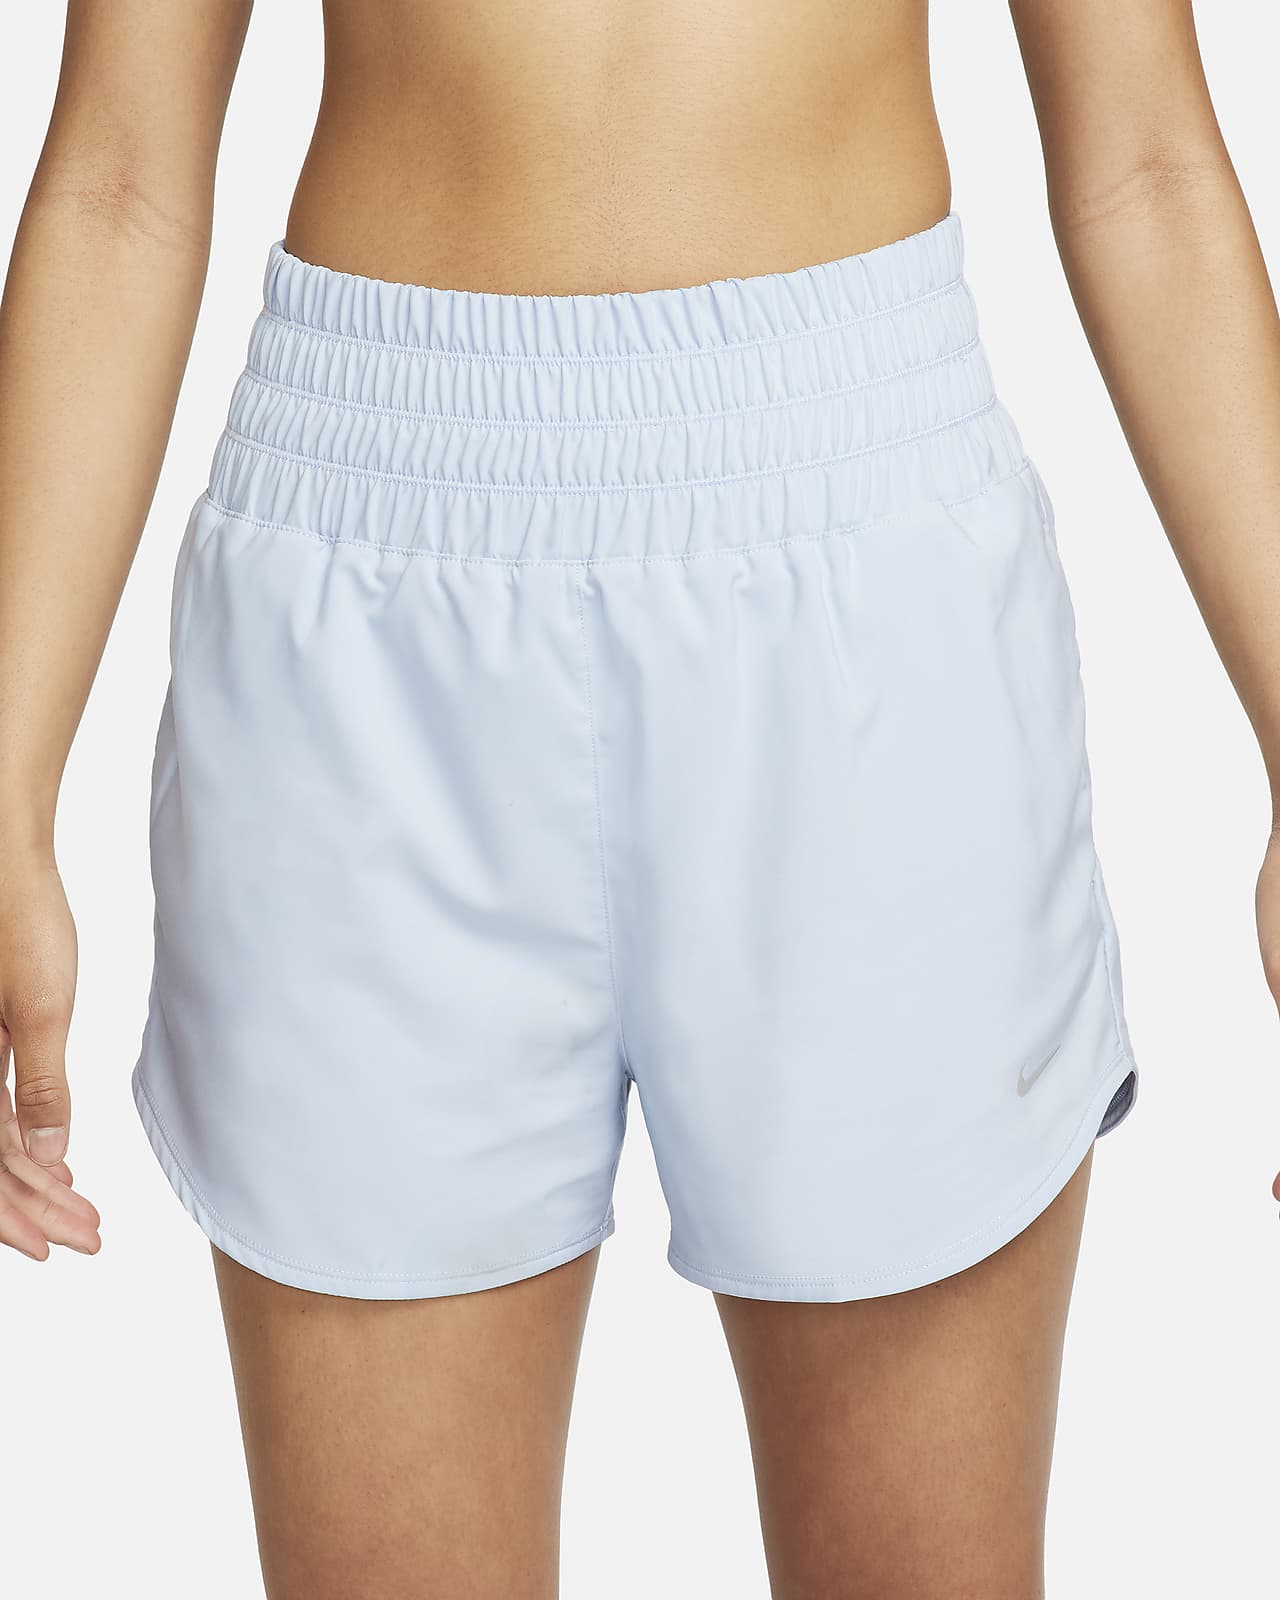 Nike One Women's Dri-FIT High-Waisted 8cm (approx.) 2-in-1 Shorts. Nike CA